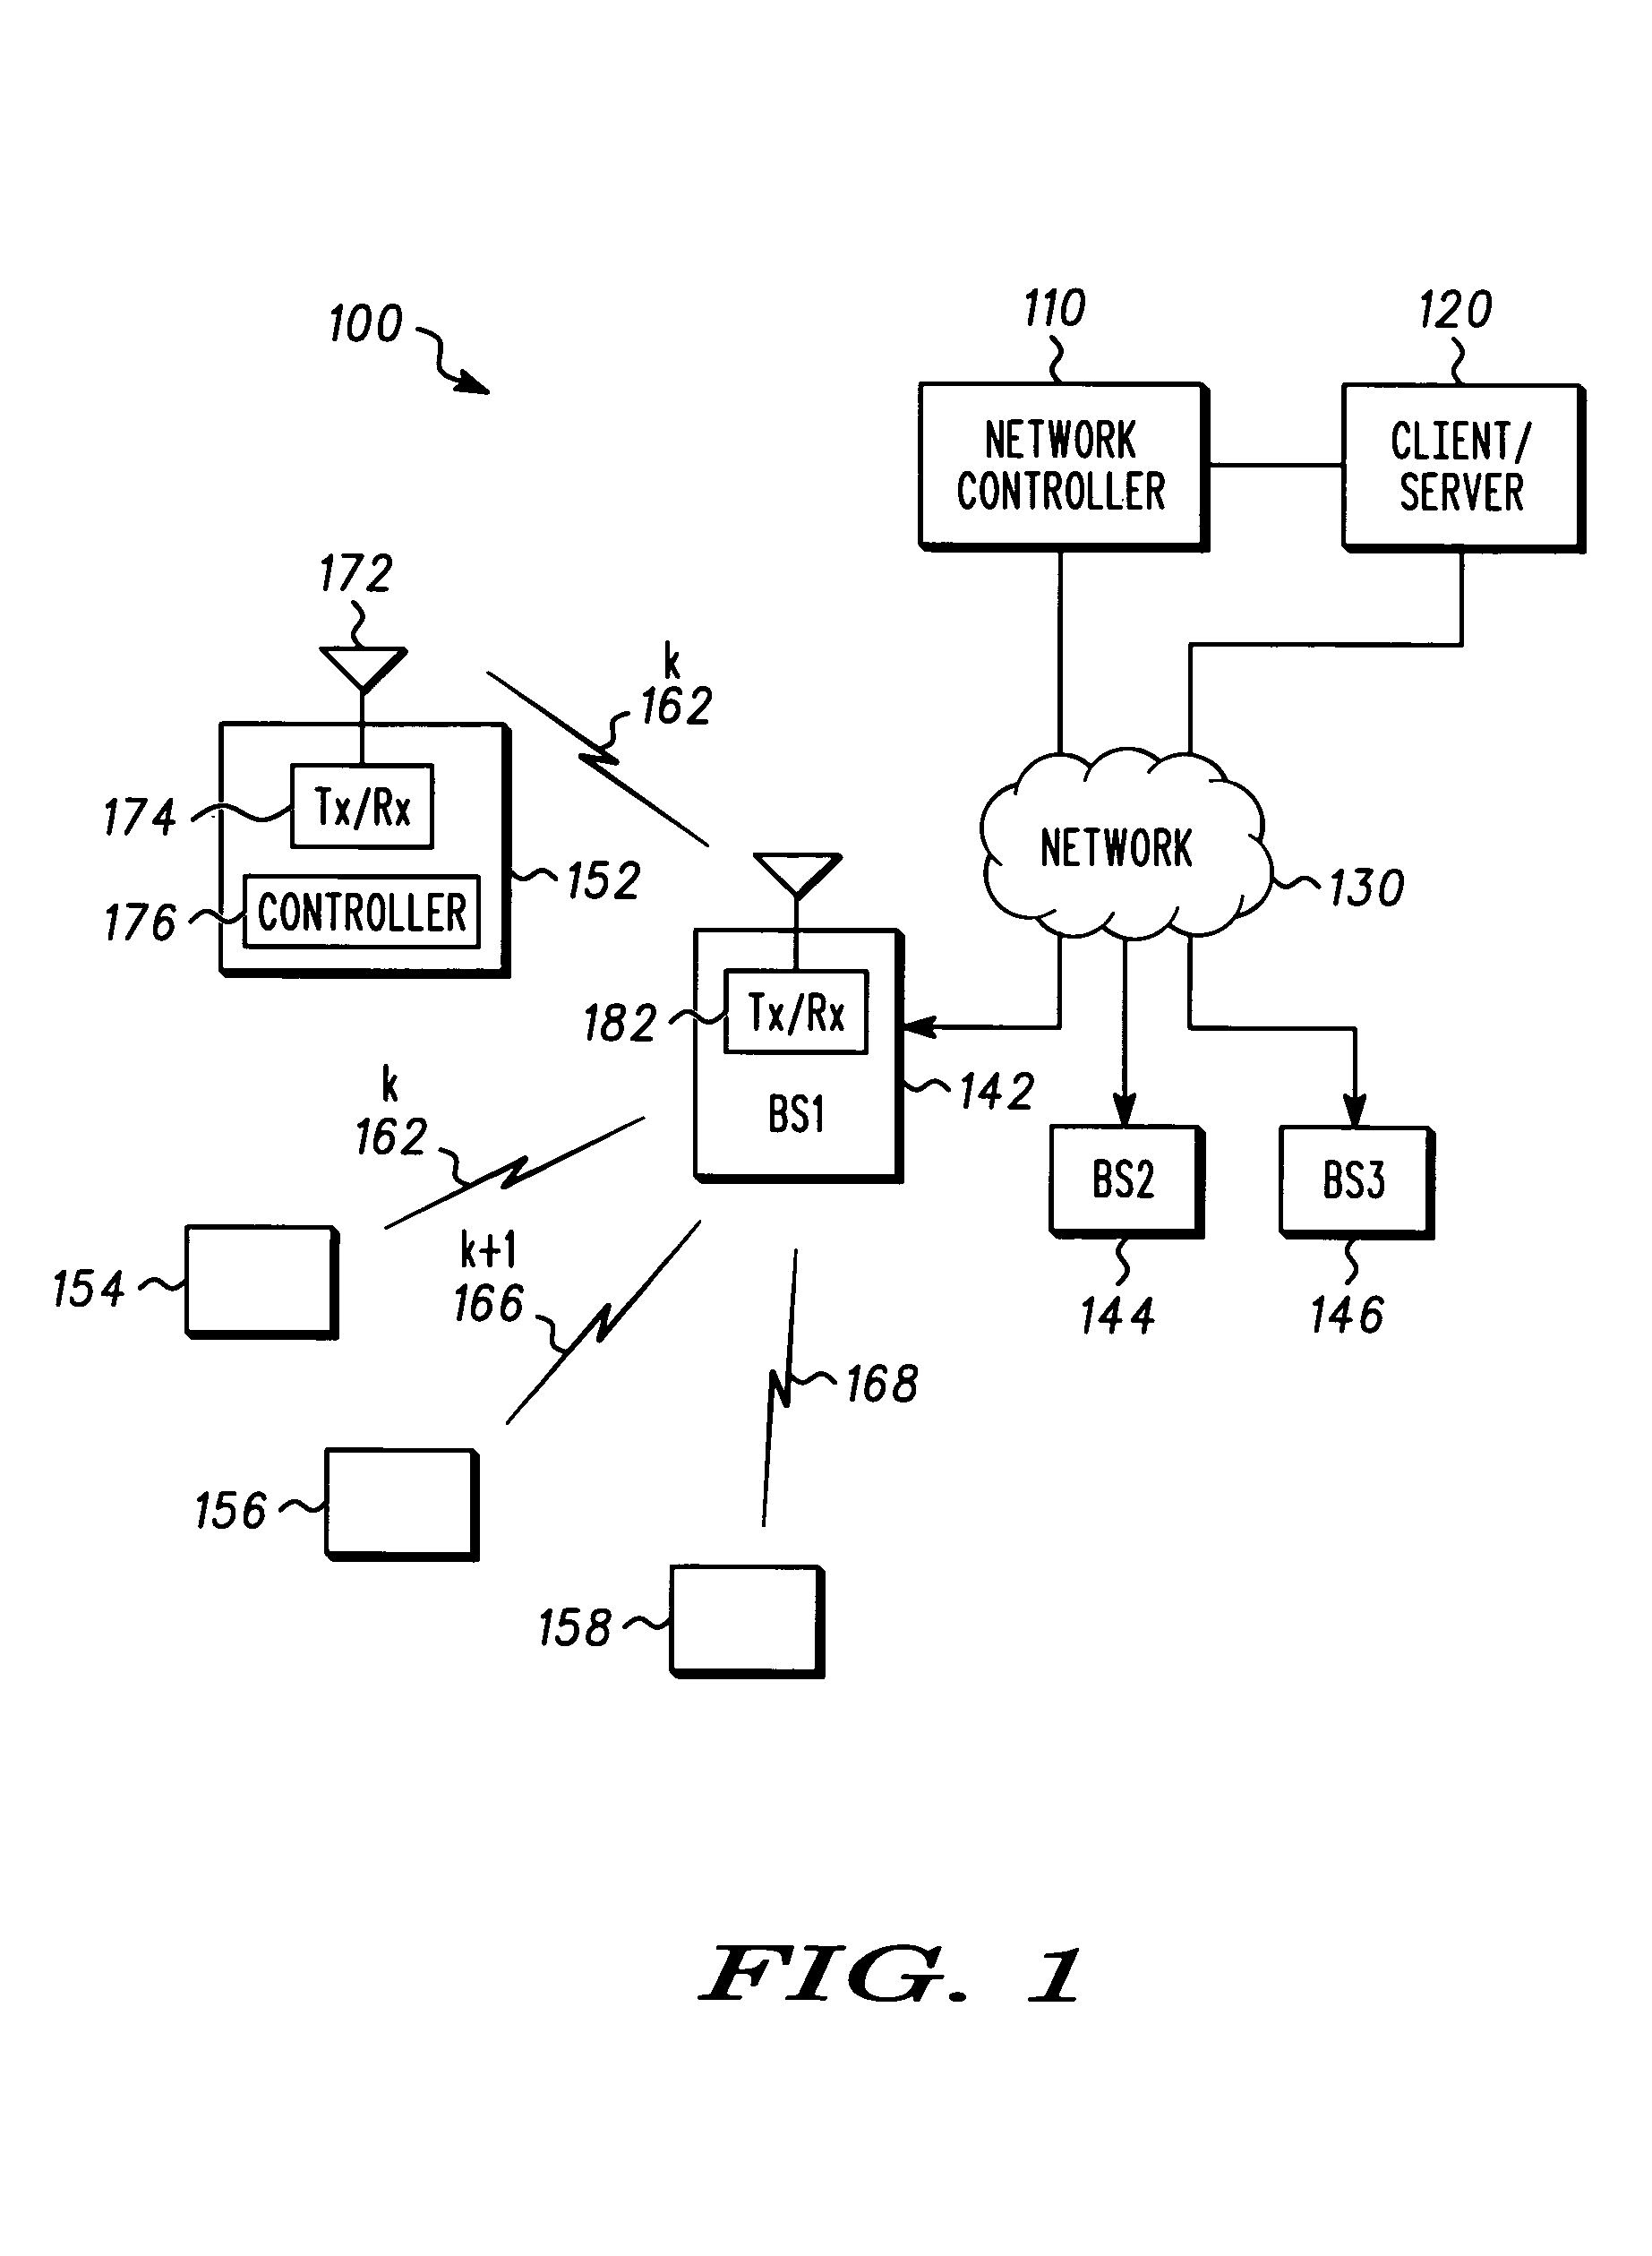 Apparatus and method for adaptive broadcast transmission